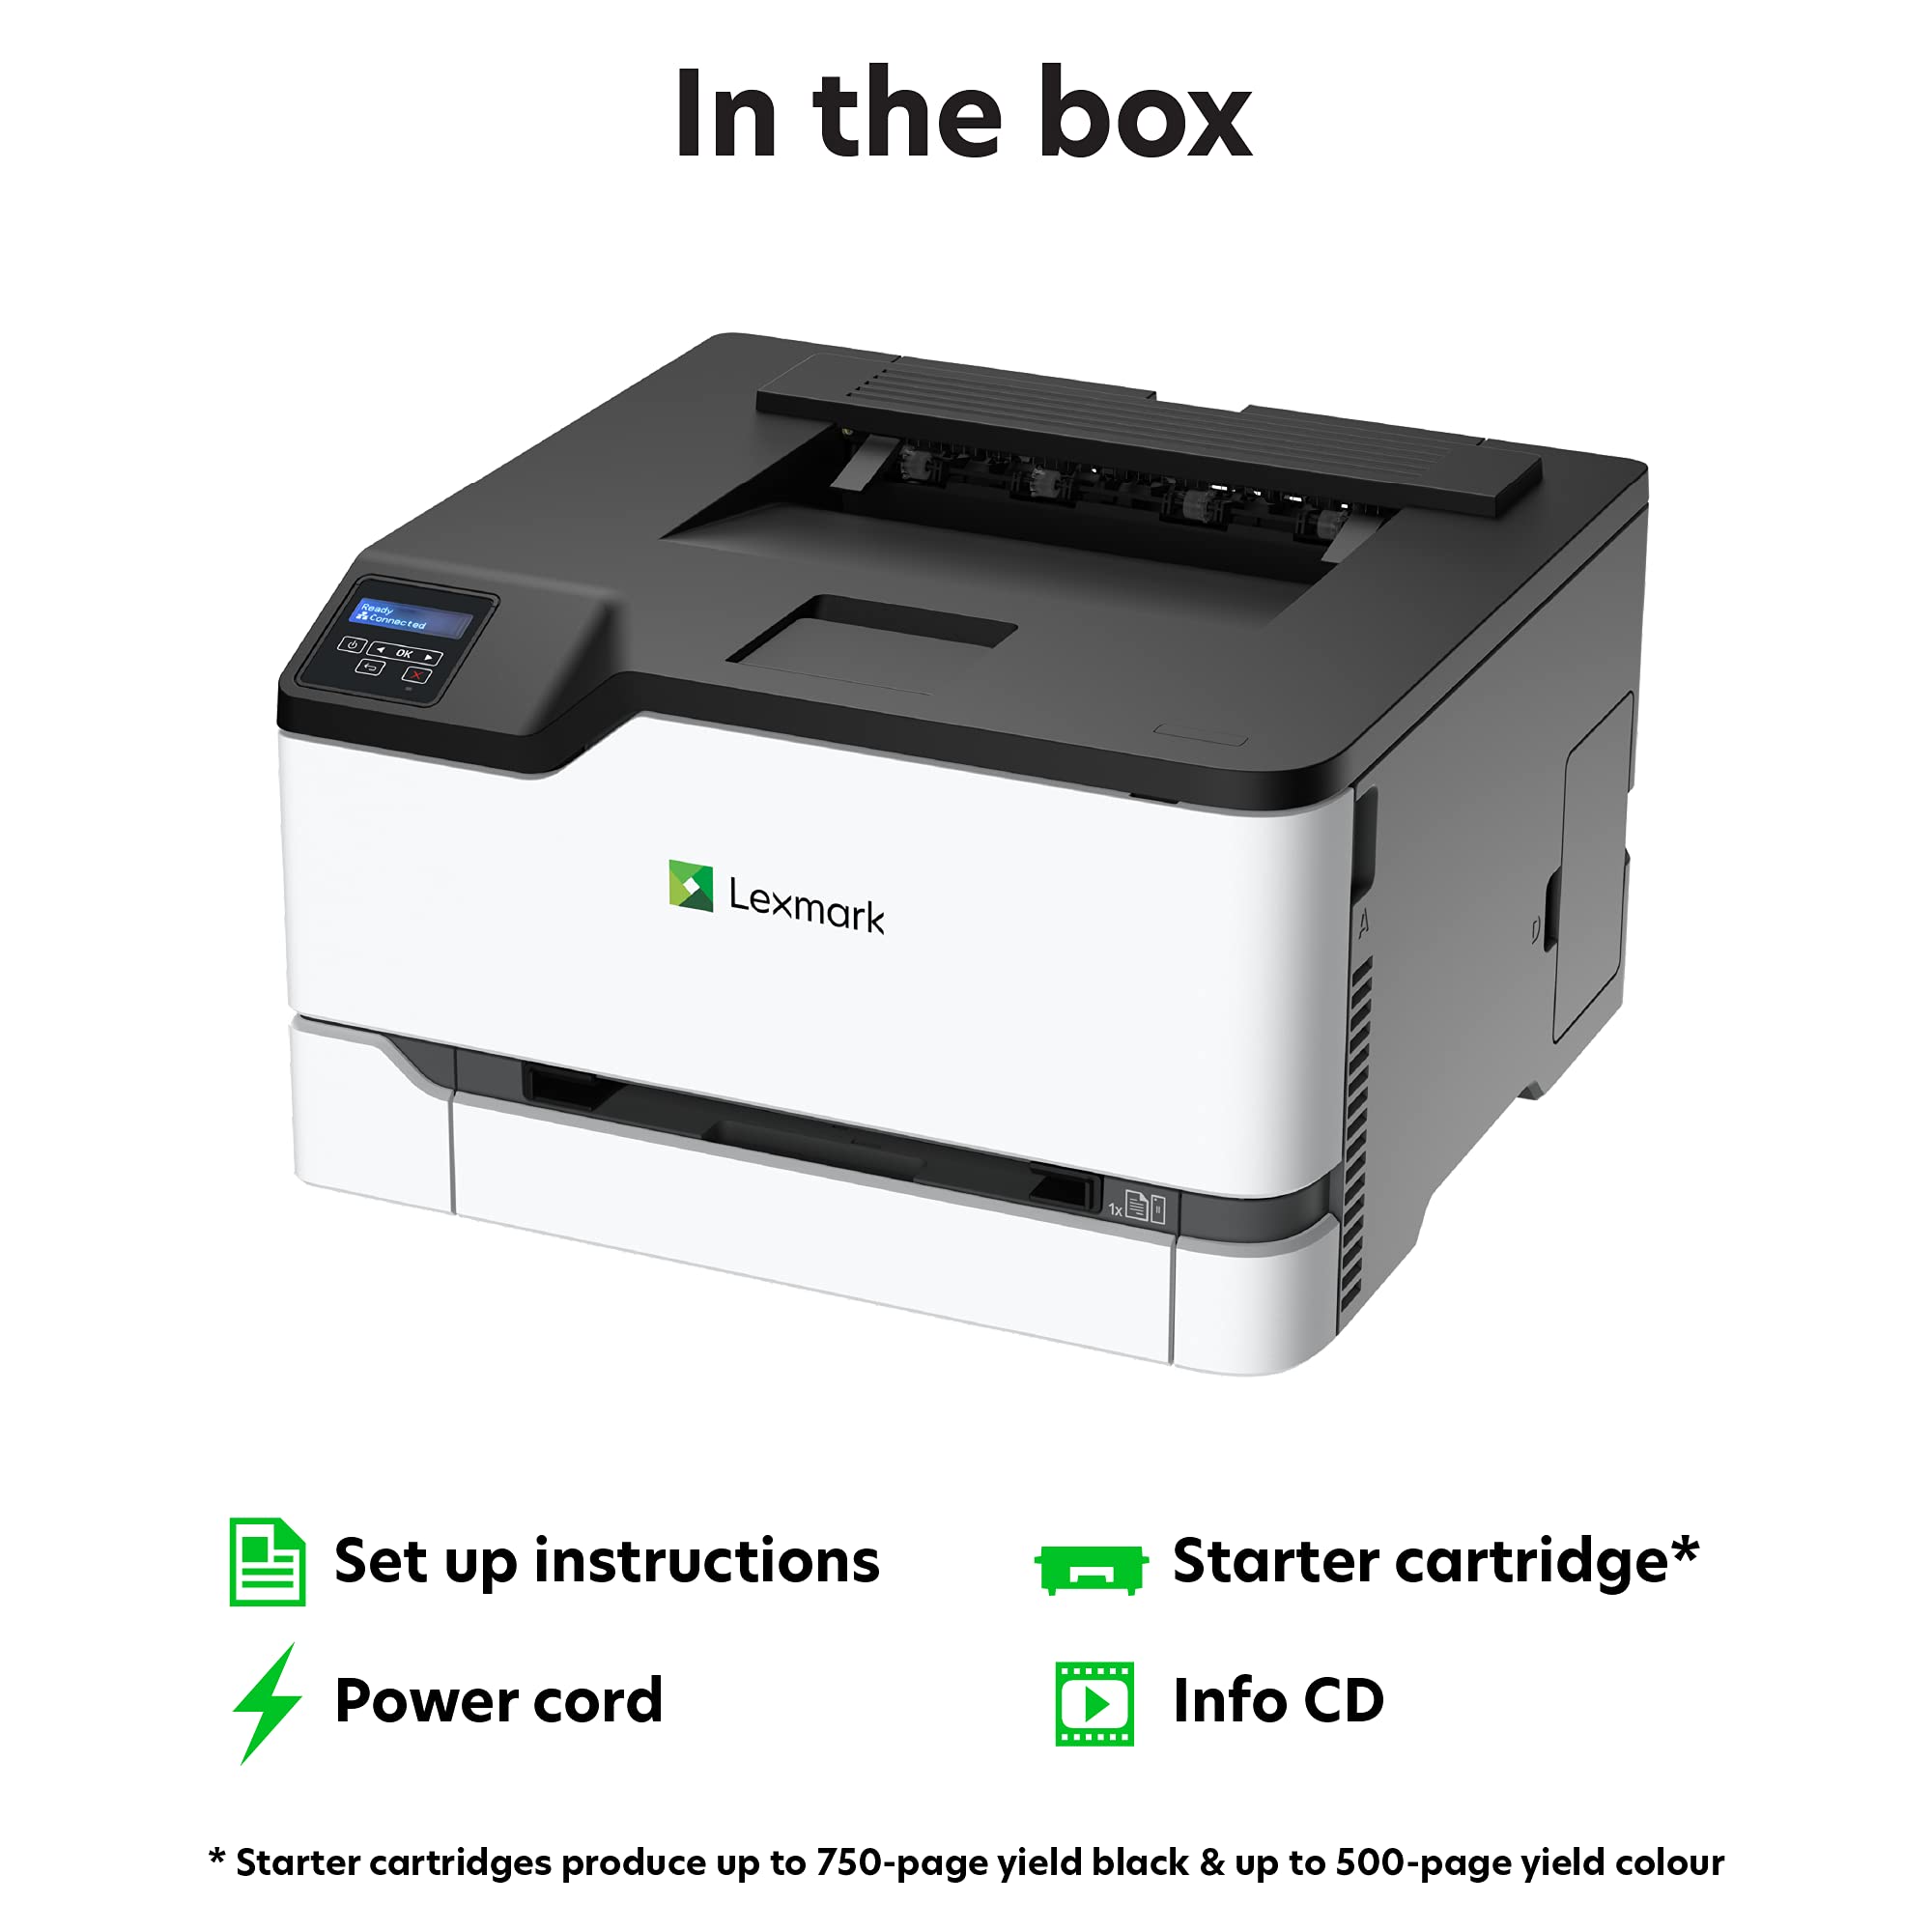 Lexmark C3326dw Color Laser Printer with Ethernet, Mobile-Friendly, Wireless Office Printer with Automatic Two-Sided Printing (3-Series)